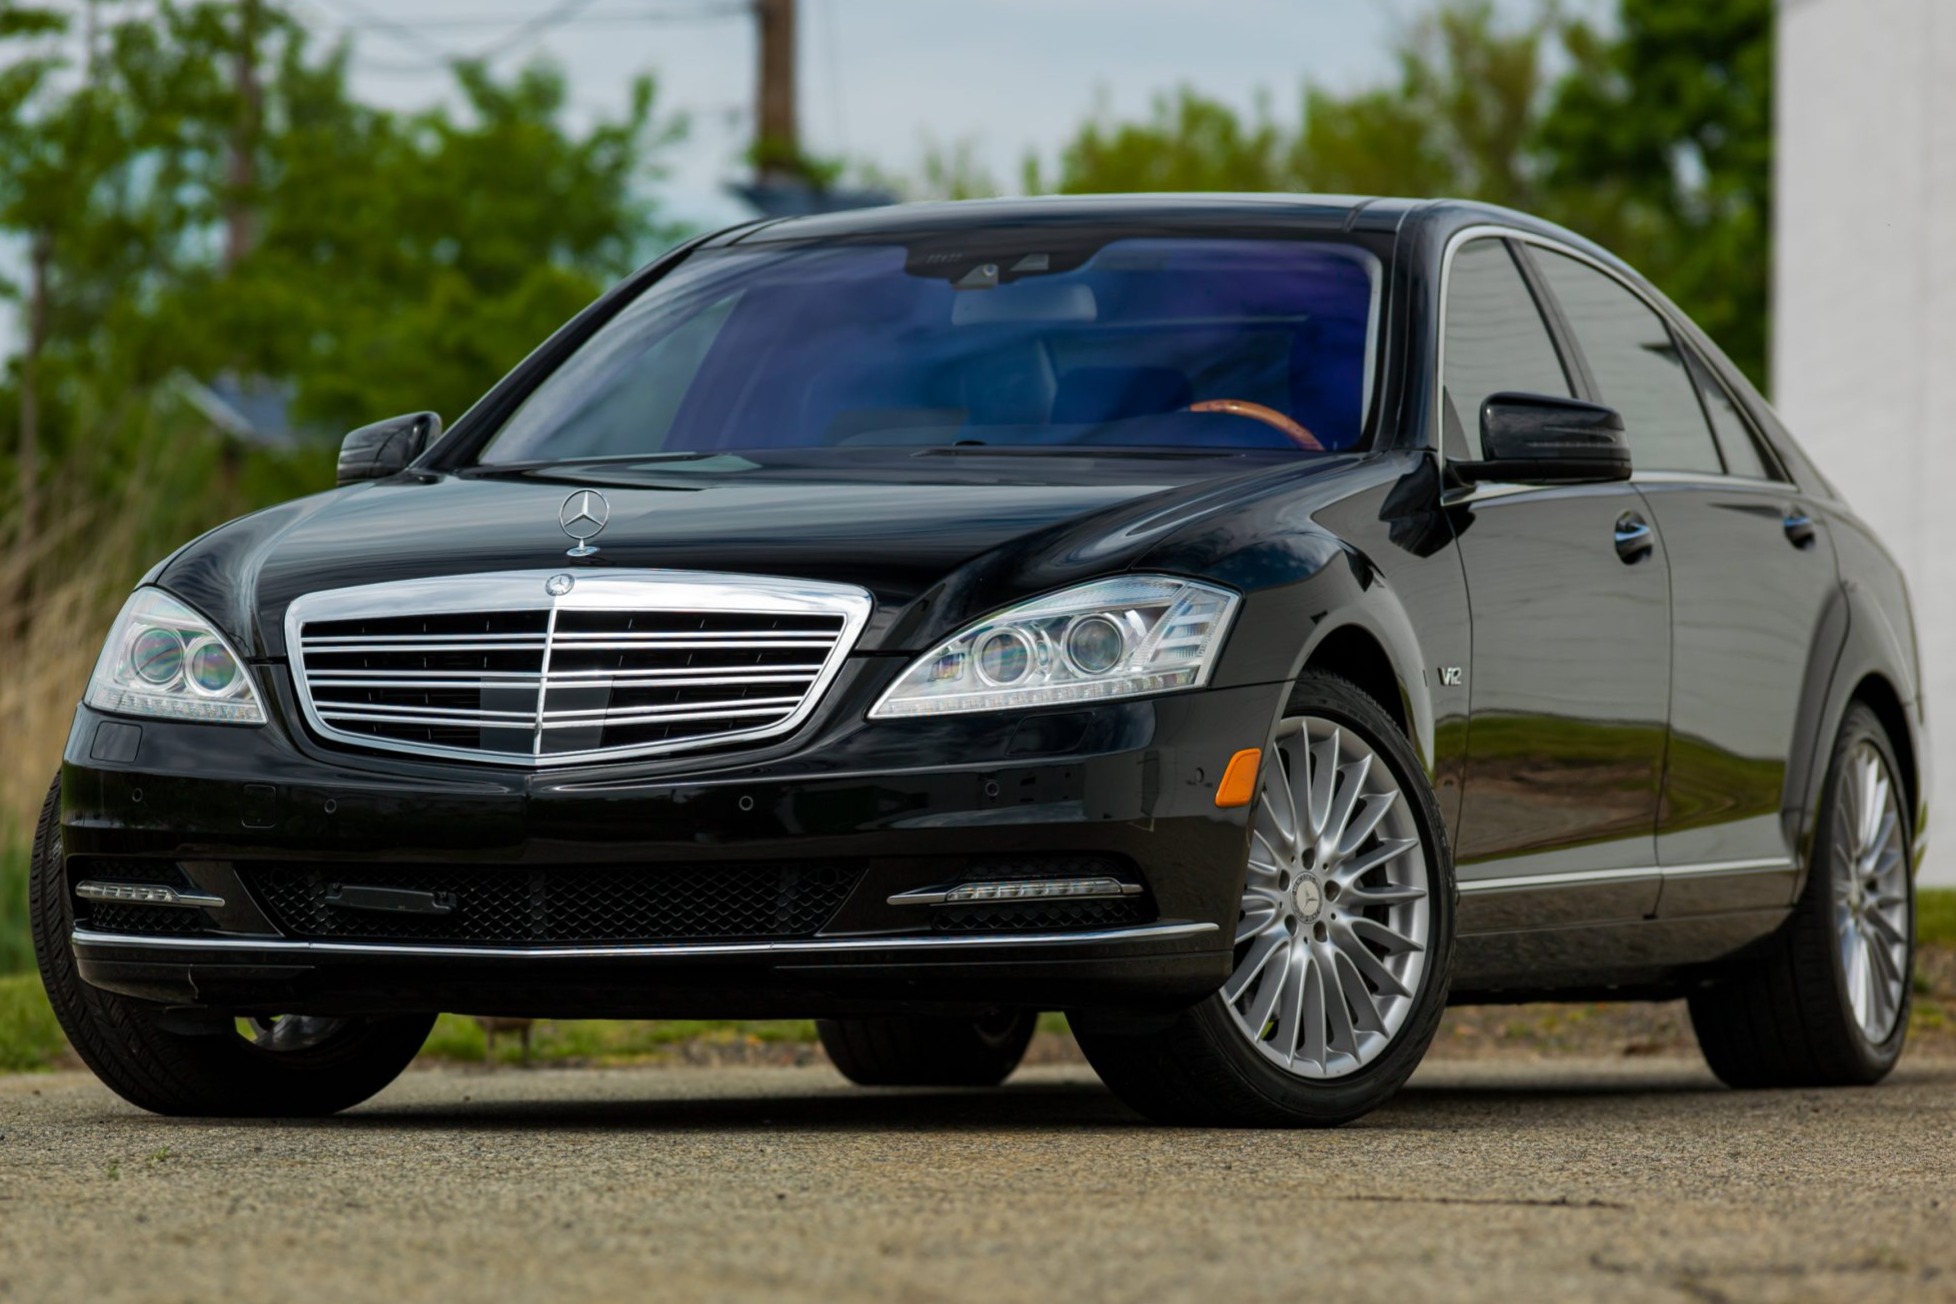 Used 24k-Mile 2011 Mercedes-Benz S600 Review